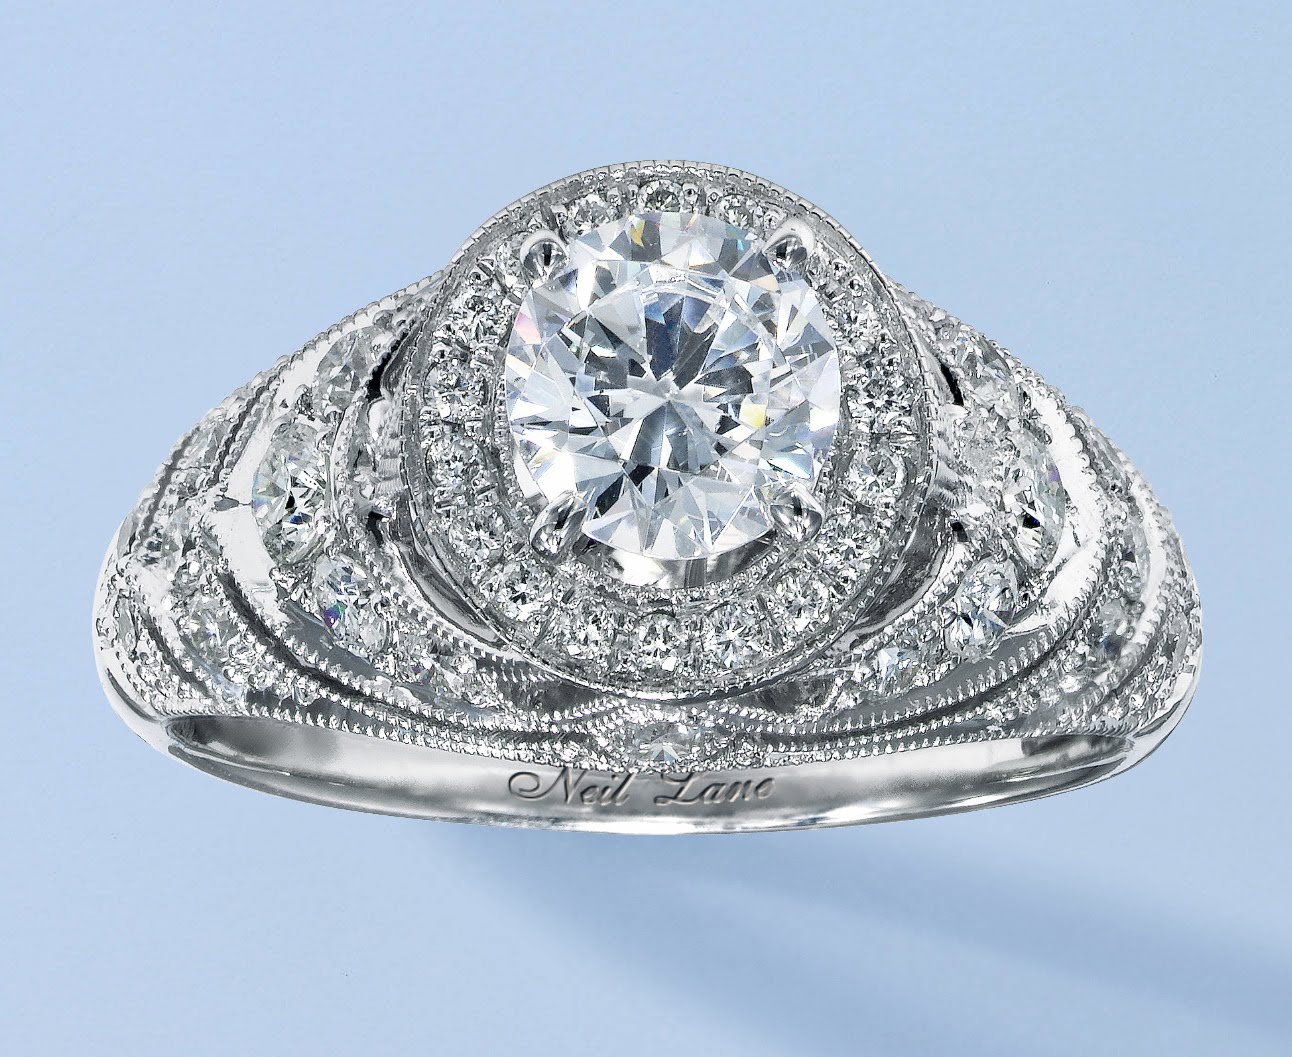 jewelry designer neil lane and kay jewelers will launch the neil lane ...